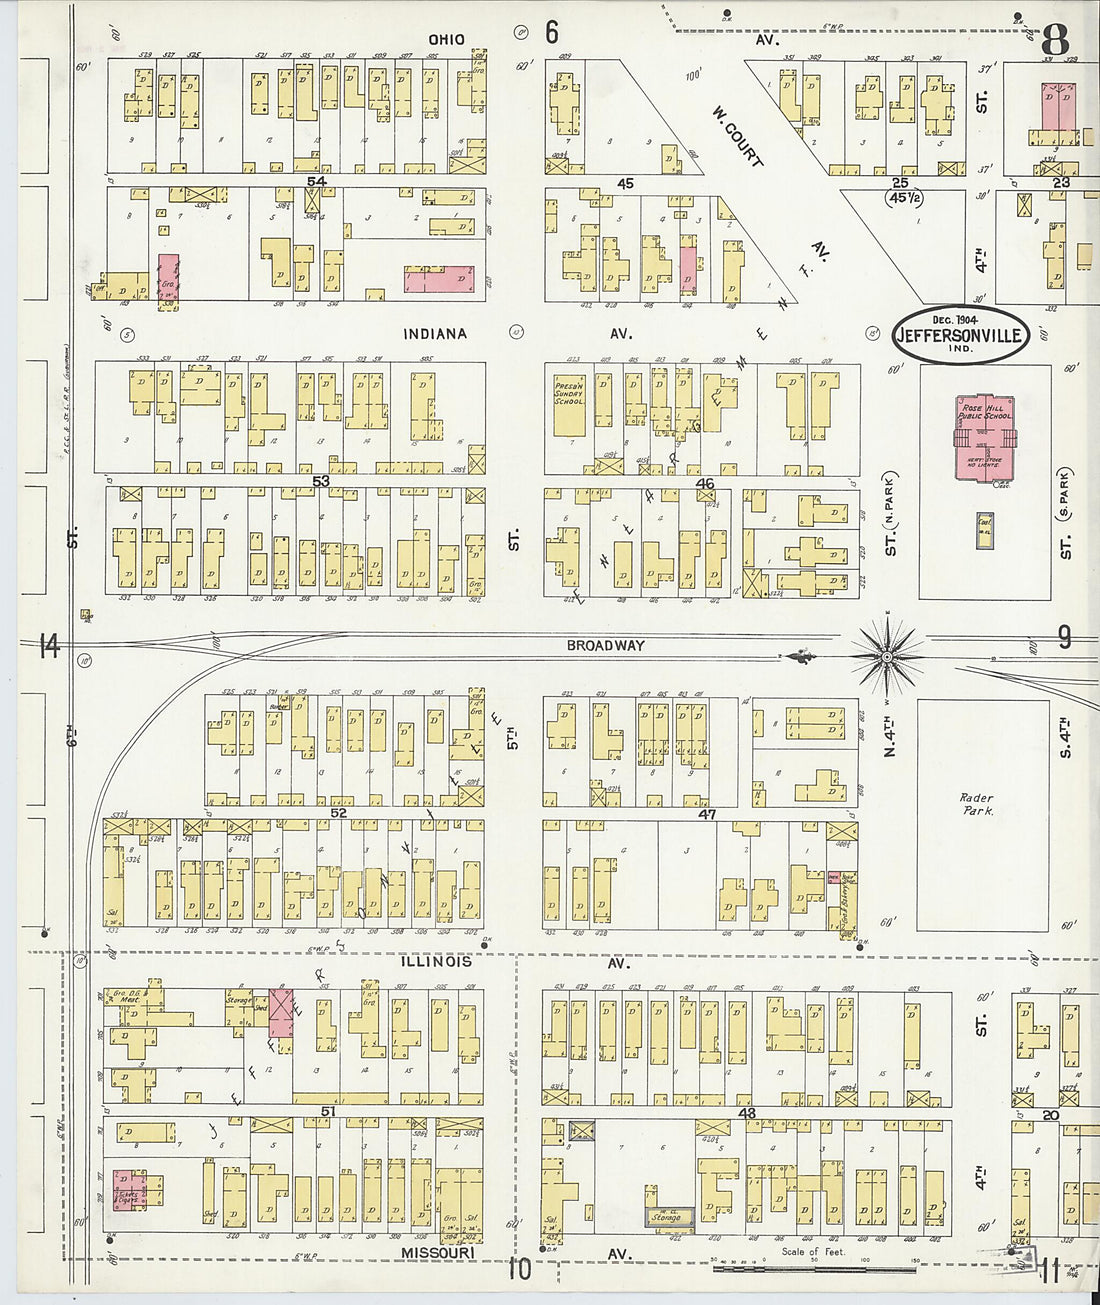 This old map of Jeffersonville, Clark County, Indiana was created by Sanborn Map Company in 1904